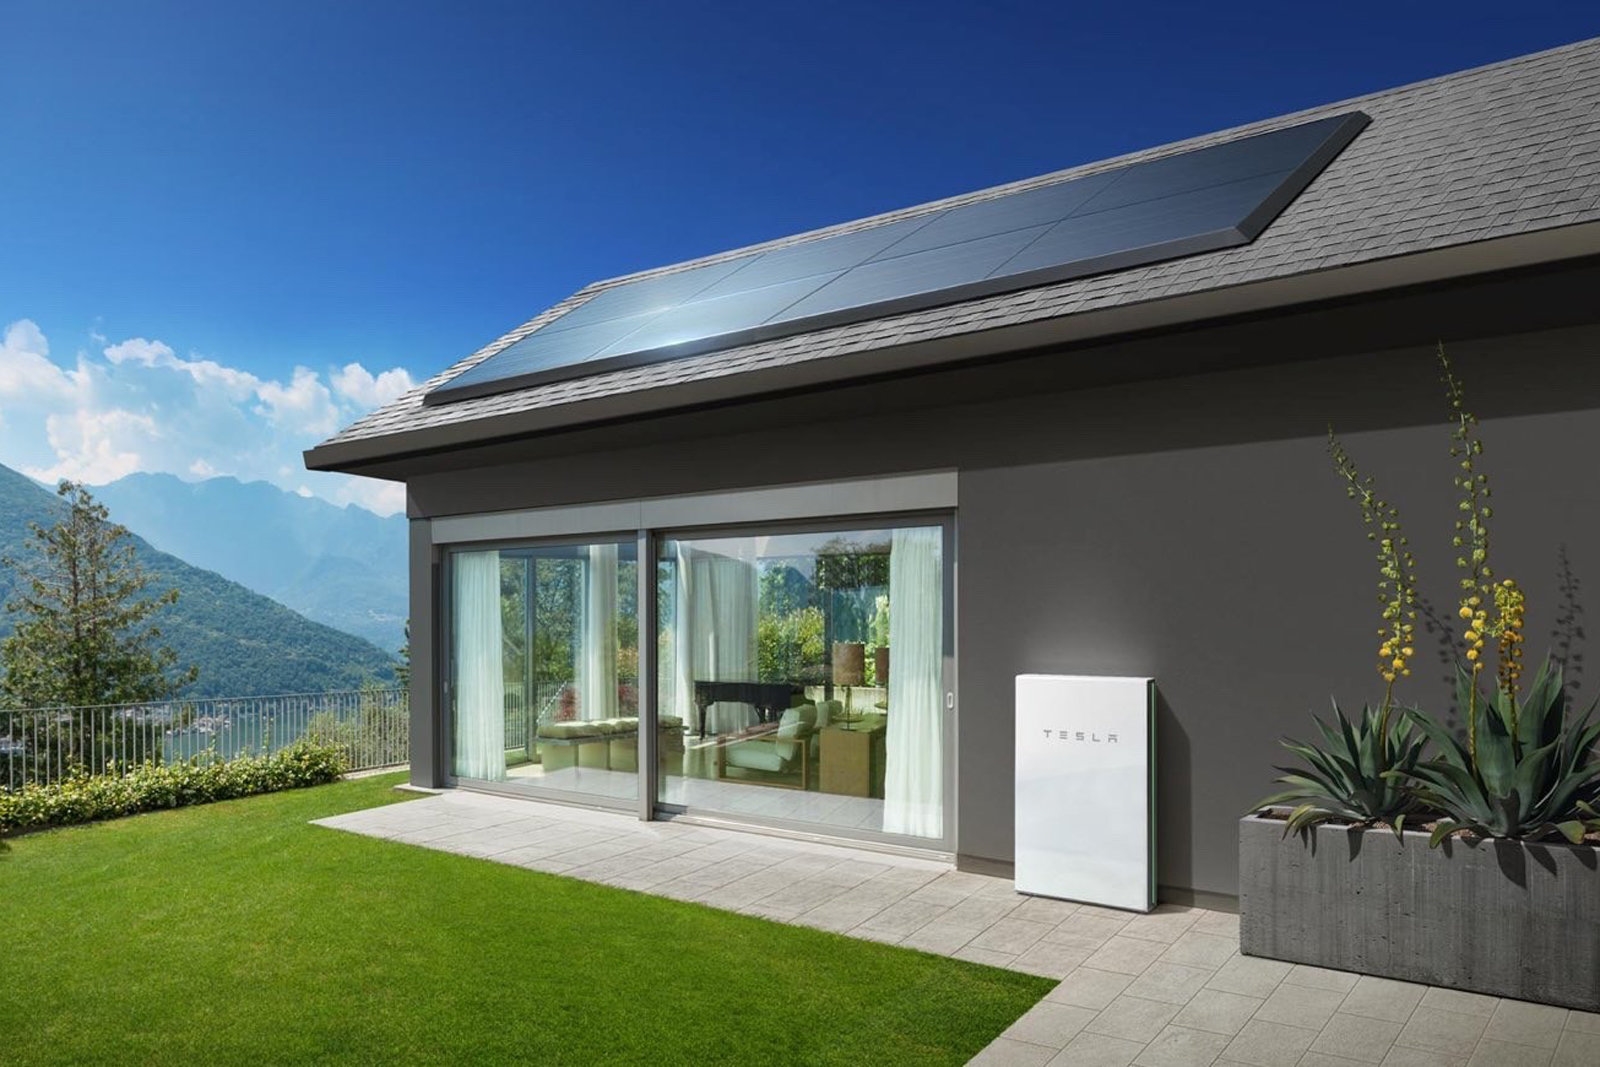 teslas relaunched solar power efforts include 50 panel rentals